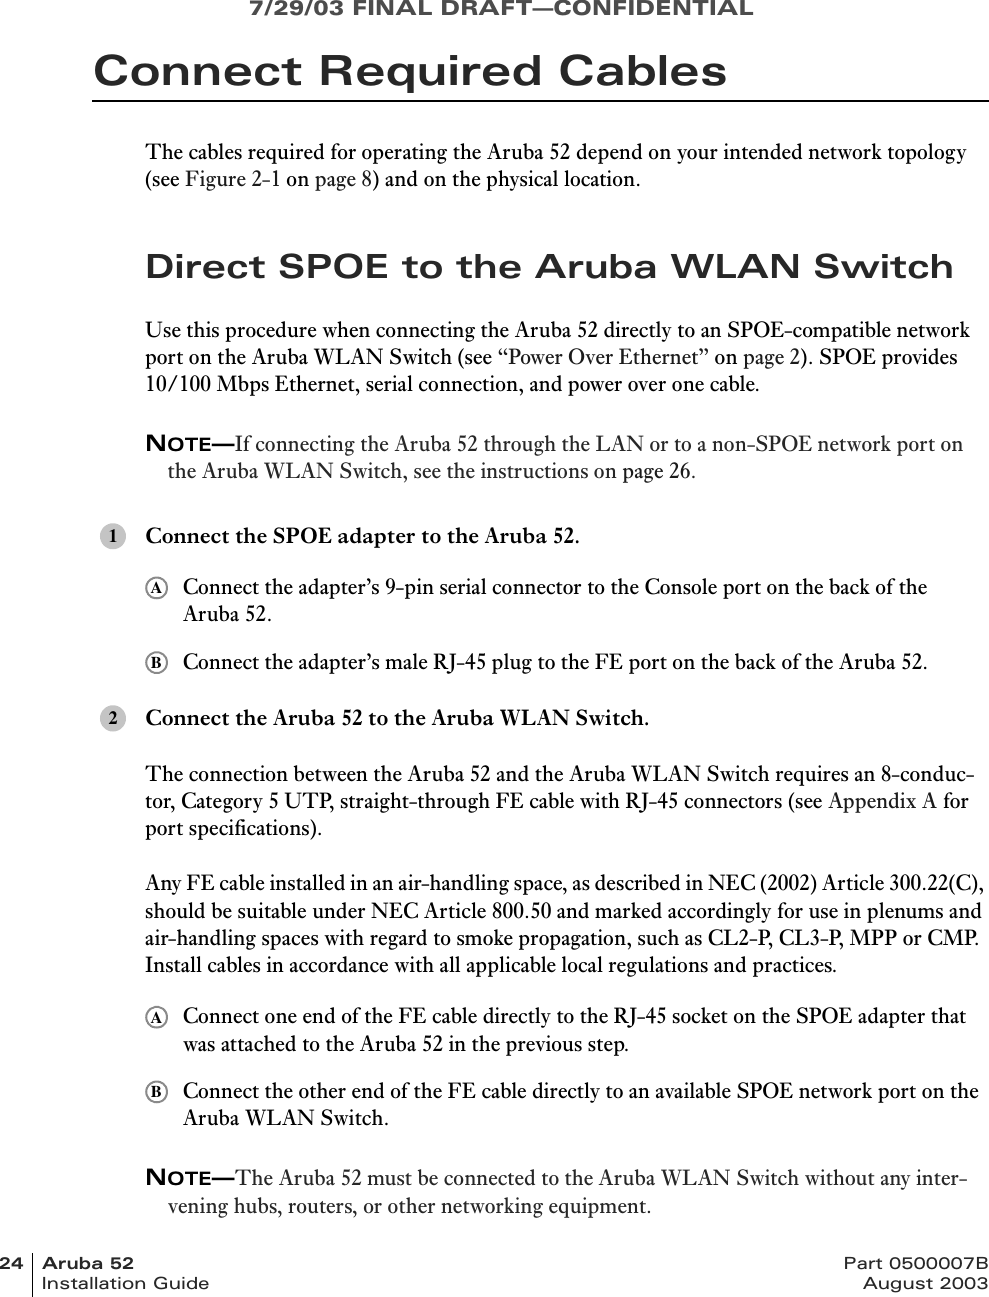 7/29/03 FINAL DRAFT—CONFIDENTIAL24 Aruba 52 Part 0500007BInstallation Guide August 2003Connect Required CablesThe cables required for operating the Aruba 52 depend on your intended network topology (see Figure 2-1 on page 8) and on the physical location.Direct SPOE to the Aruba WLAN SwitchUse this procedure when connecting the Aruba 52 directly to an SPOE-compatible network port on the Aruba WLAN Switch (see “Power Over Ethernet” on page 2). SPOE provides 10/100 Mbps Ethernet, serial connection, and power over one cable.NOTE—If connecting the Aruba 52 through the LAN or to a non-SPOE network port on the Aruba WLAN Switch, see the instructions on page 26.Connect the SPOE adapter to the Aruba 52.Connect the adapter’s 9-pin serial connector to the Console port on the back of the Aruba 52.Connect the adapter’s male RJ-45 plug to the FE port on the back of the Aruba 52.Connect the Aruba 52 to the Aruba WLAN Switch.The connection between the Aruba 52 and the Aruba WLAN Switch requires an 8-conduc-tor, Category 5 UTP, straight-through FE cable with RJ-45 connectors (see Appendix A for port specifications).Any FE cable installed in an air-handling space, as described in NEC (2002) Article 300.22(C), should be suitable under NEC Article 800.50 and marked accordingly for use in plenums and air-handling spaces with regard to smoke propagation, such as CL2-P, CL3-P, MPP or CMP. Install cables in accordance with all applicable local regulations and practices.Connect one end of the FE cable directly to the RJ-45 socket on the SPOE adapter that was attached to the Aruba 52 in the previous step.Connect the other end of the FE cable directly to an available SPOE network port on the Aruba WLAN Switch.NOTE—The Aruba 52 must be connected to the Aruba WLAN Switch without any inter-vening hubs, routers, or other networking equipment.1AB2AB